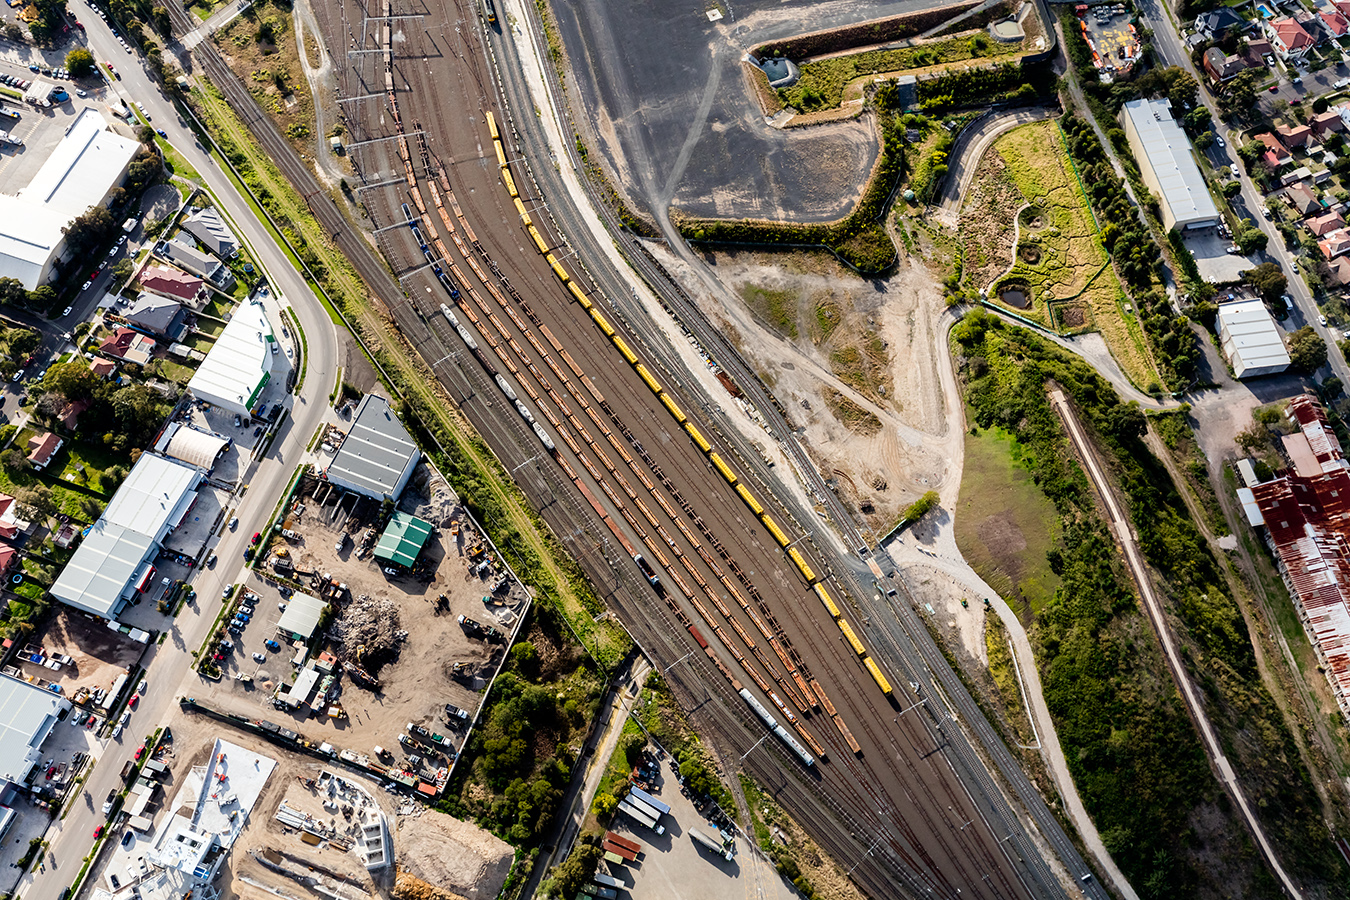 ENFIELD RAIL YARDS FOR ARTC